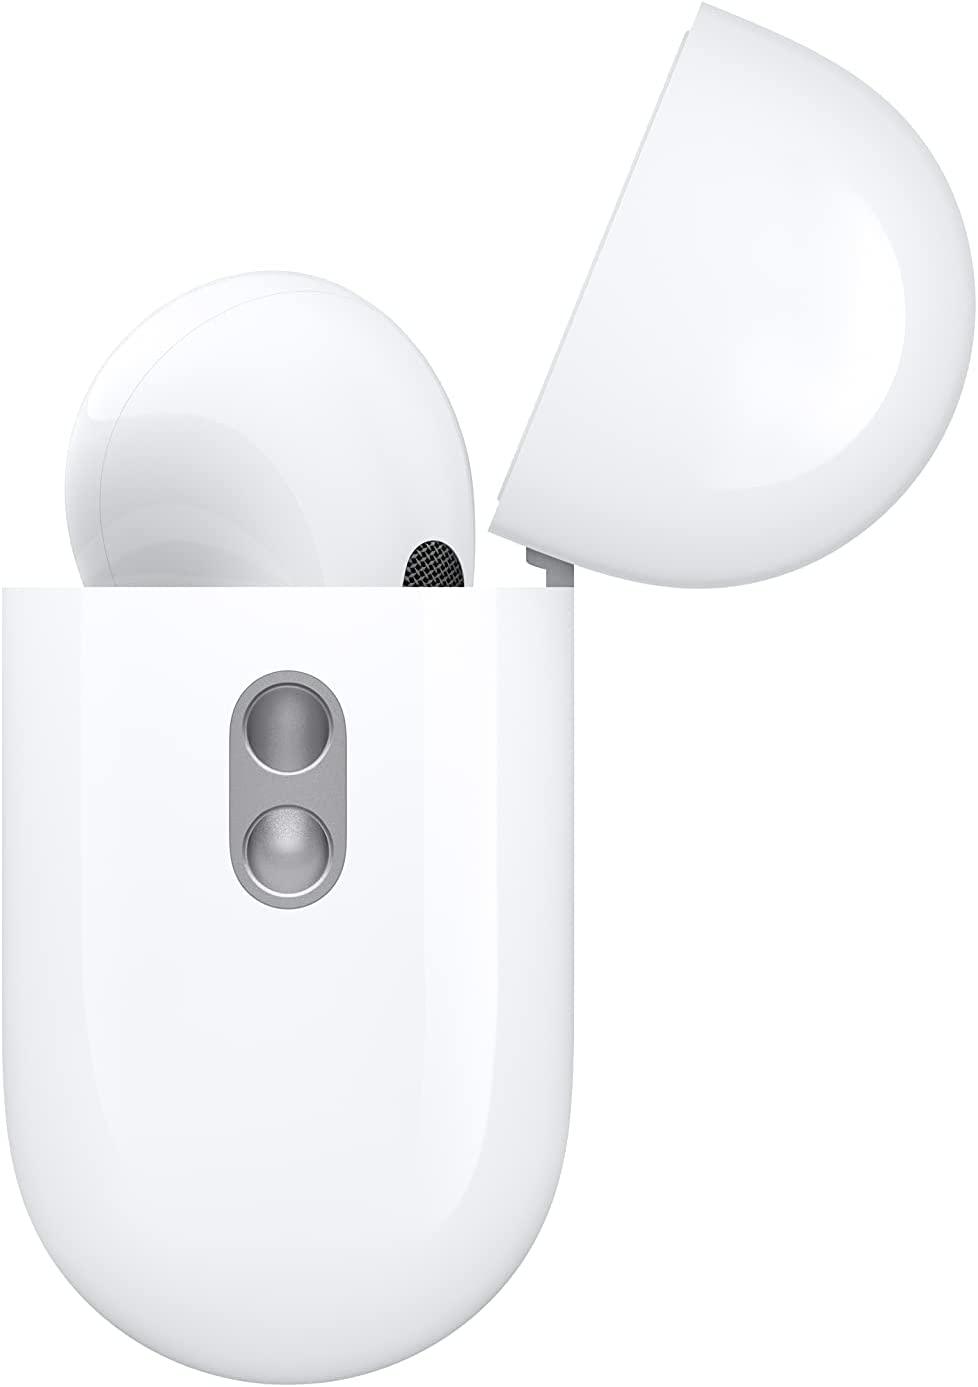 Immerse Yourself in Clear, Balanced Sound - Apple AirPods Pro (2nd Gen) at iStore Mauritius